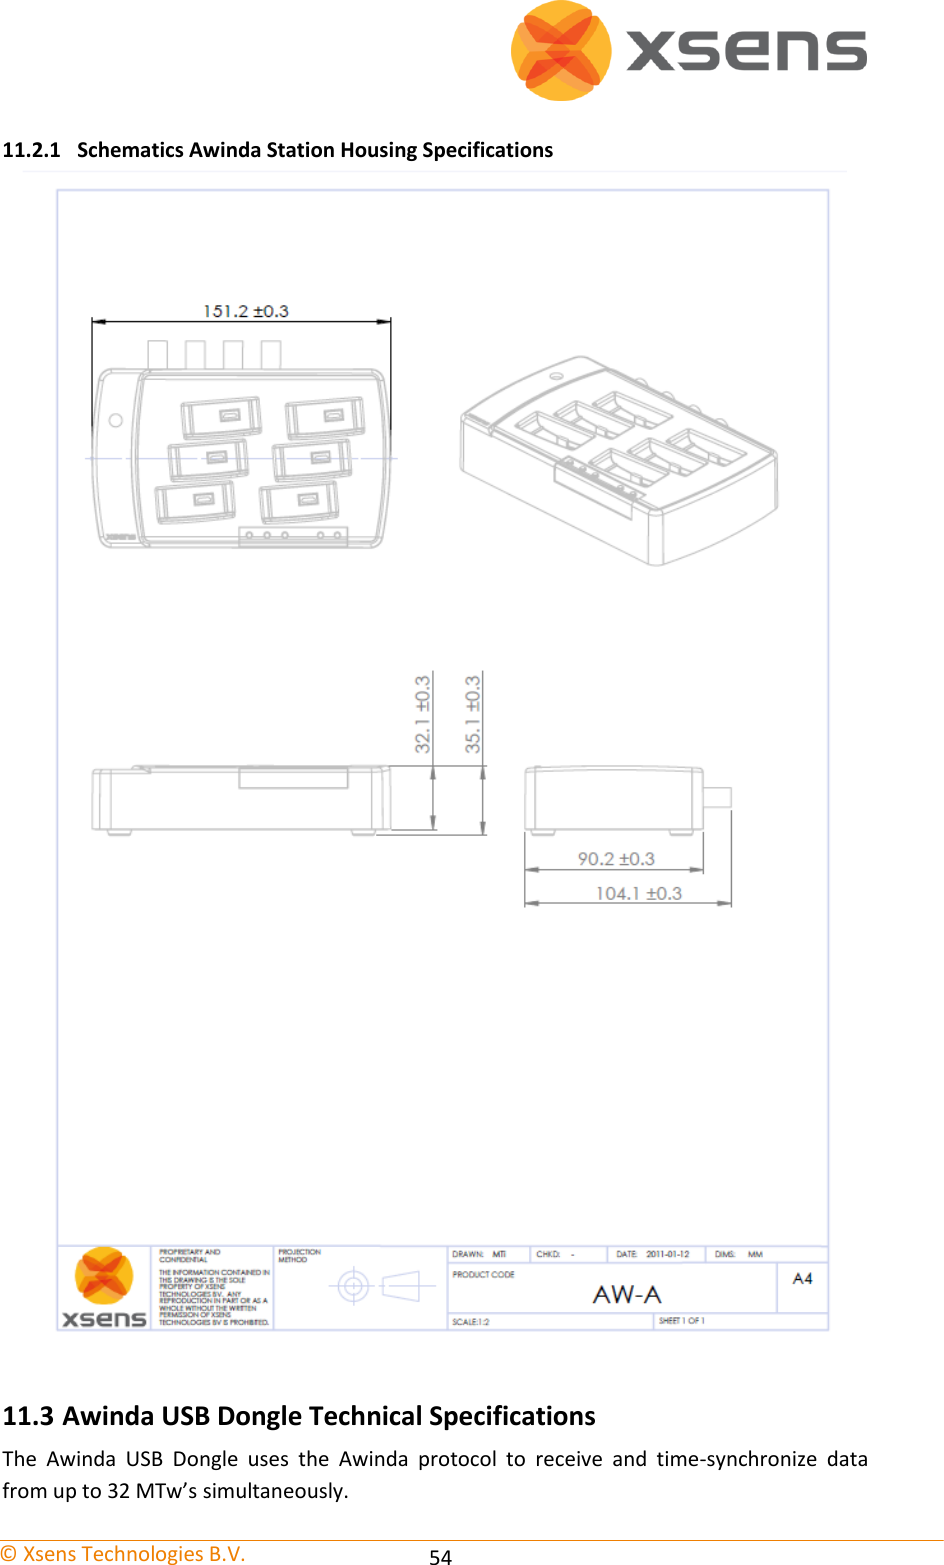   © Xsens Technologies B.V.   54 11.2.1 Schematics Awinda Station Housing Specifications  11.3 Awinda USB Dongle Technical Specifications The  Awinda  USB  Dongle  uses  the  Awinda  protocol  to  receive  and  time-synchronize  data from up to 32 MTw’s simultaneously. 